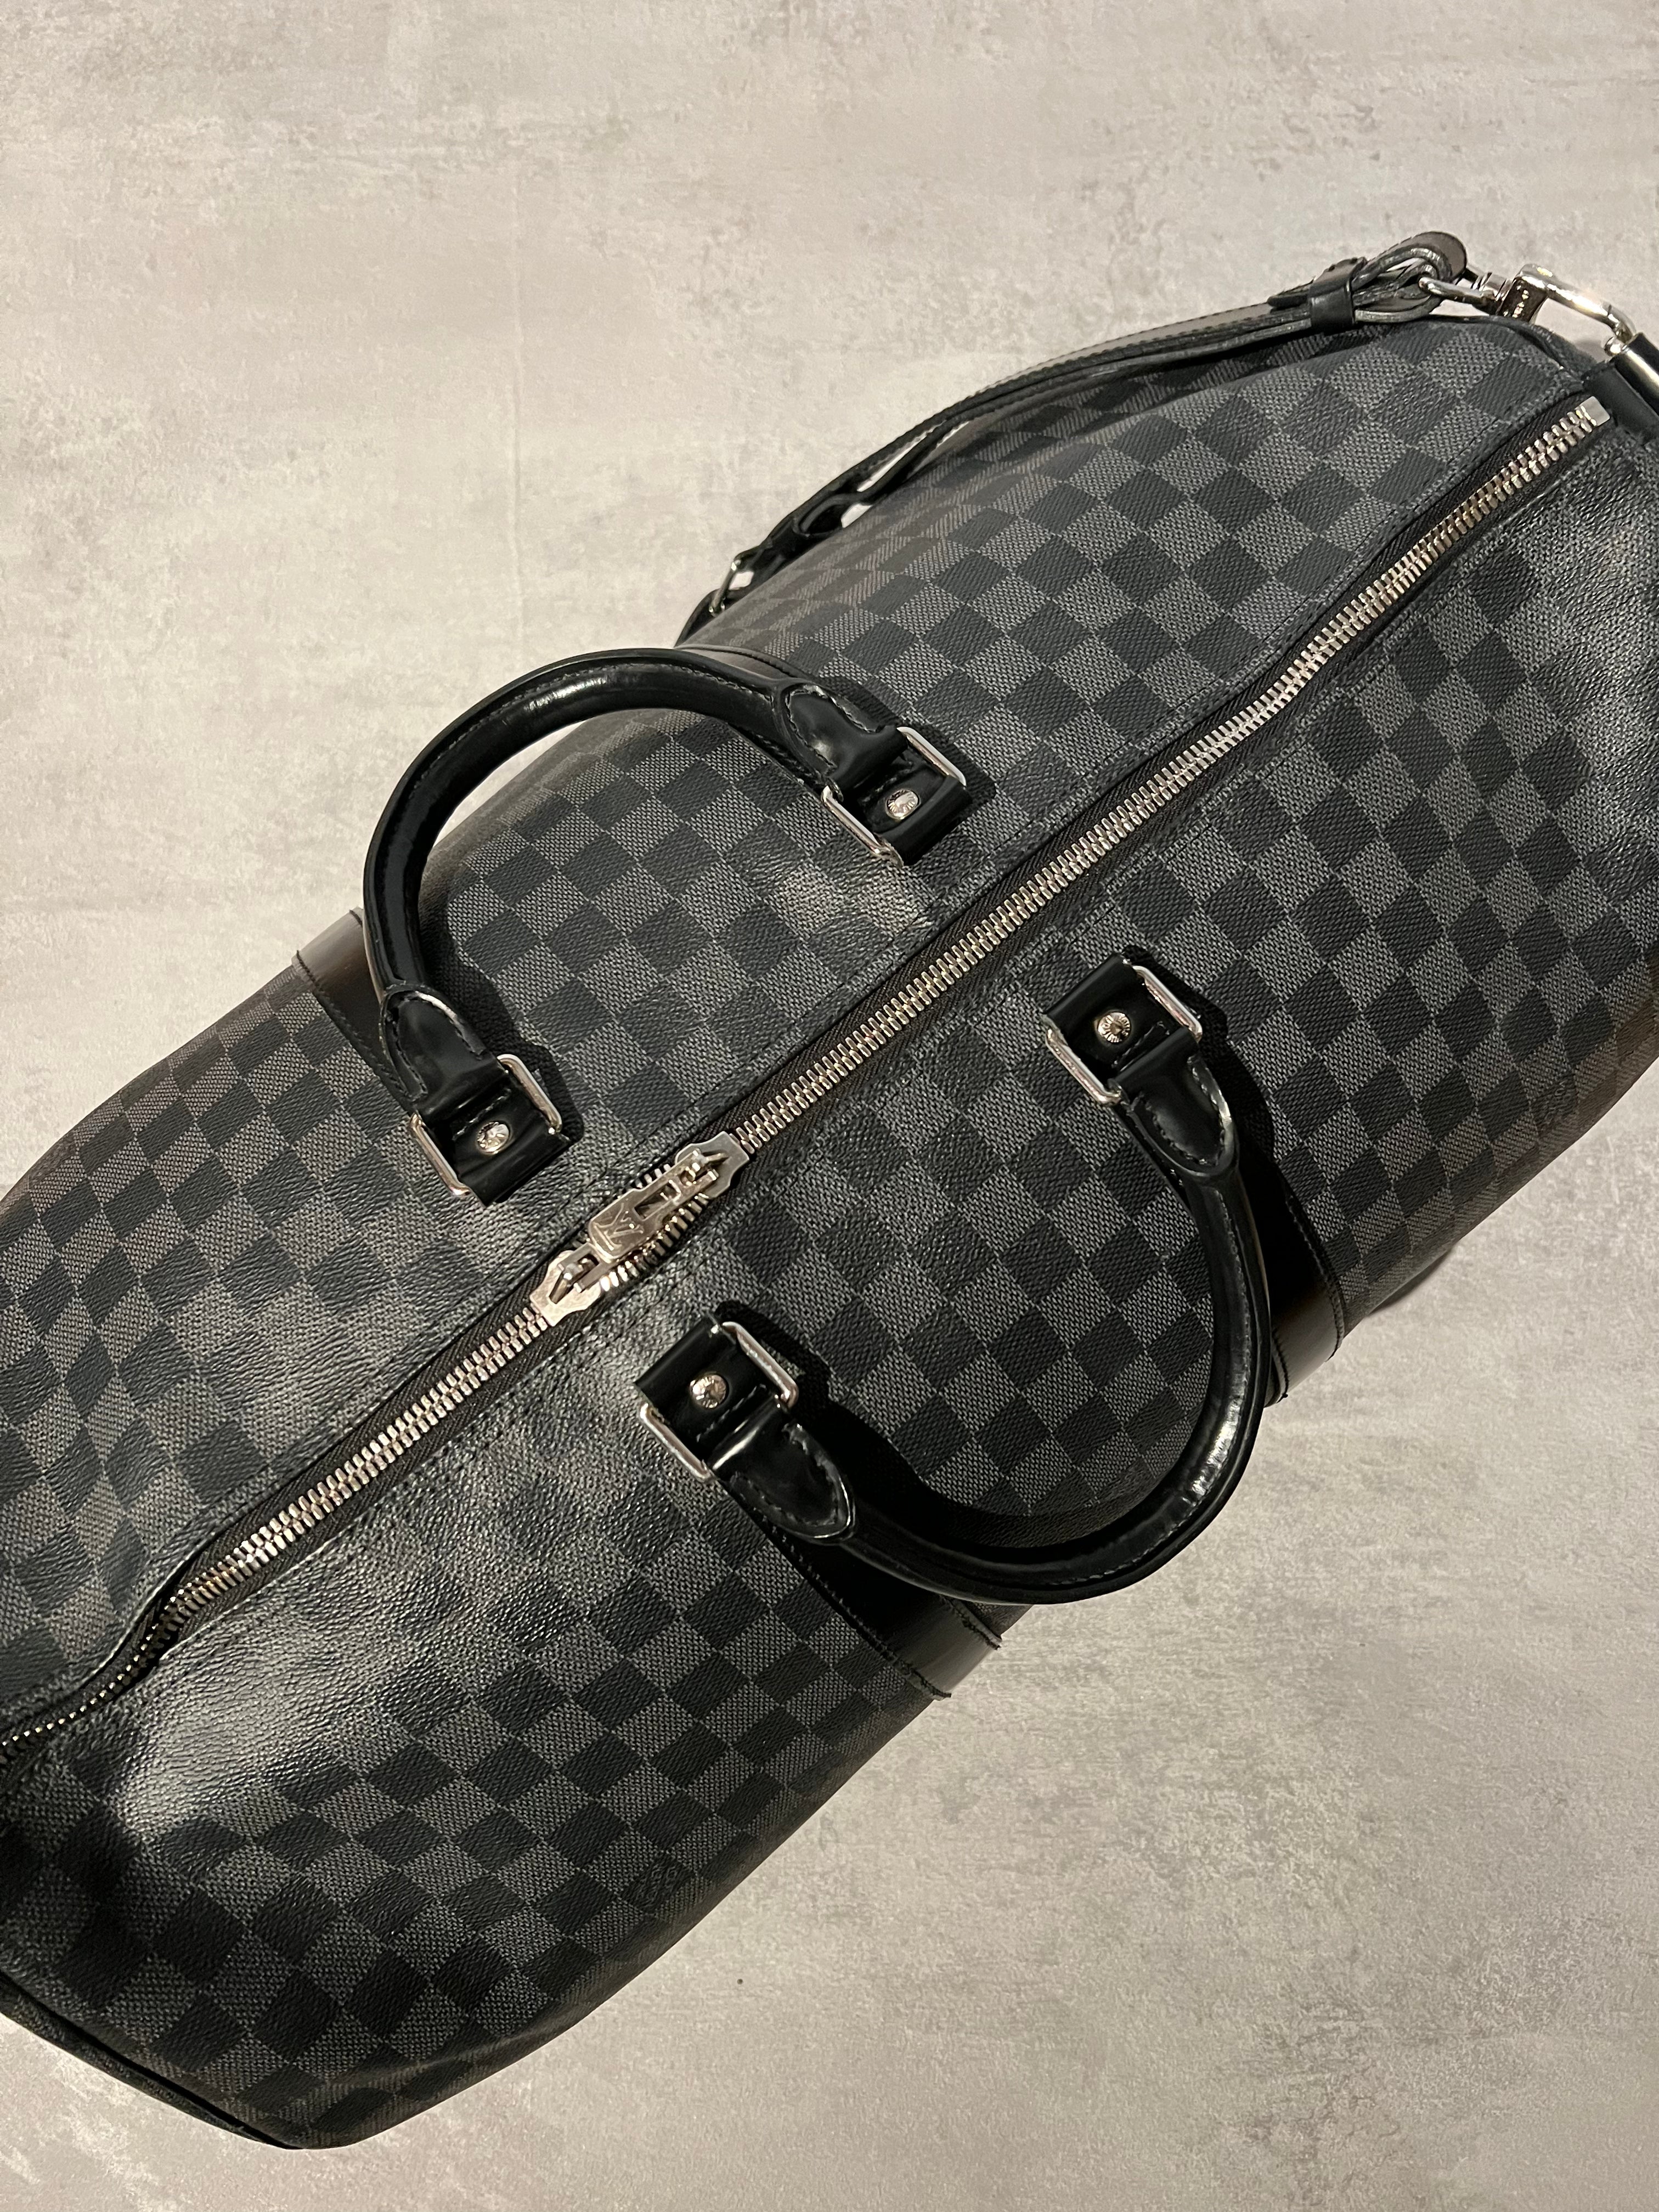 $1475 Keepall Bando 55 The ideal carry-on.